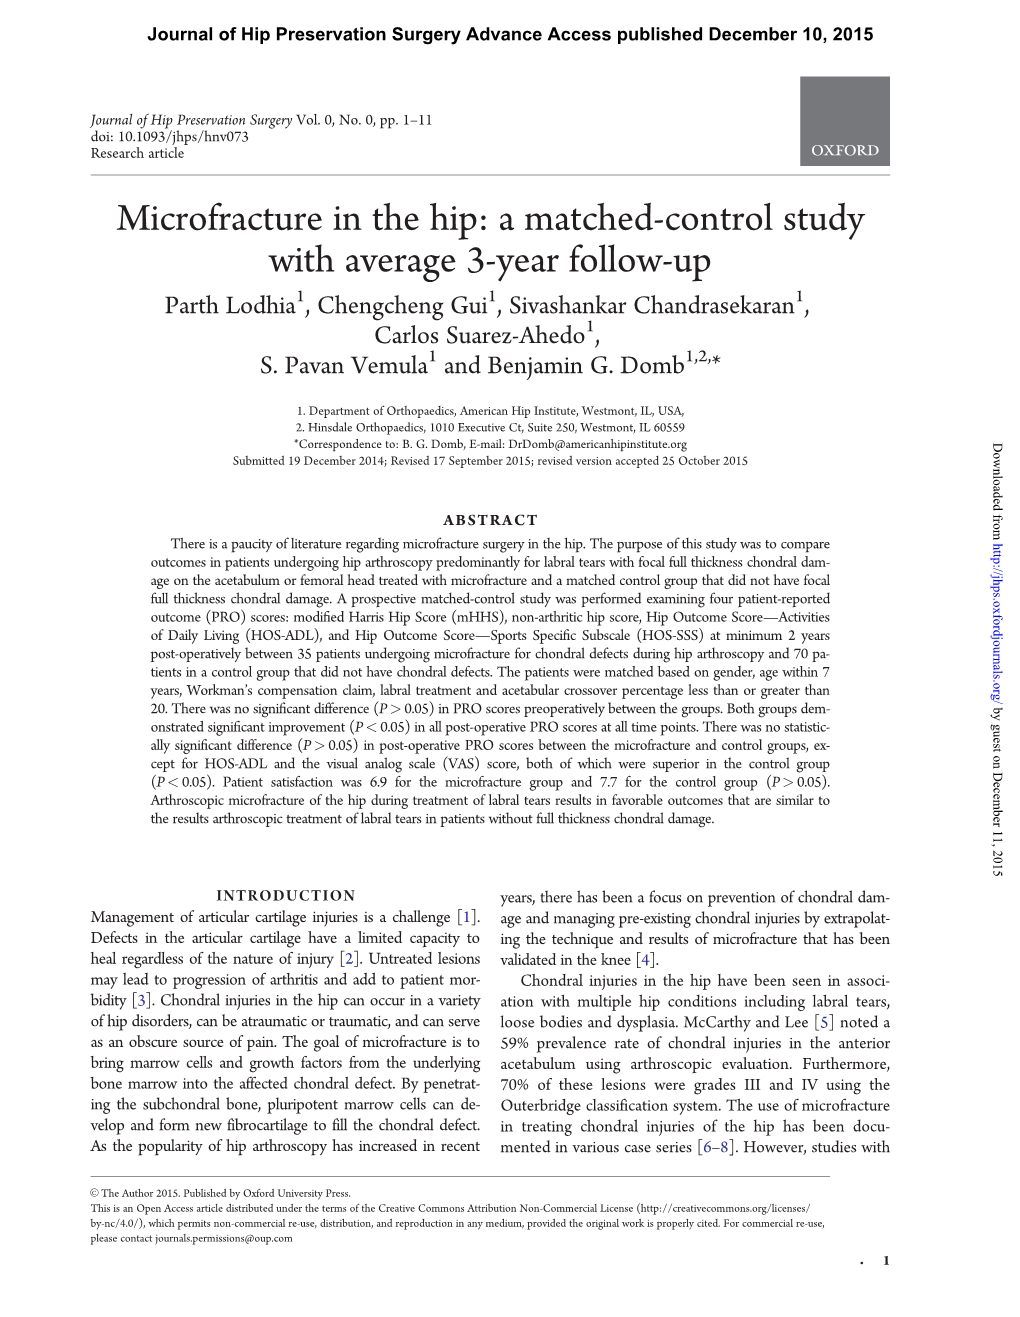 Microfracture in the Hip: a Matched-Control Study with Average 3-Year Follow-Up Parth Lodhia1, Chengcheng Gui1, Sivashankar Chandrasekaran1, Carlos Suarez-Ahedo1, S